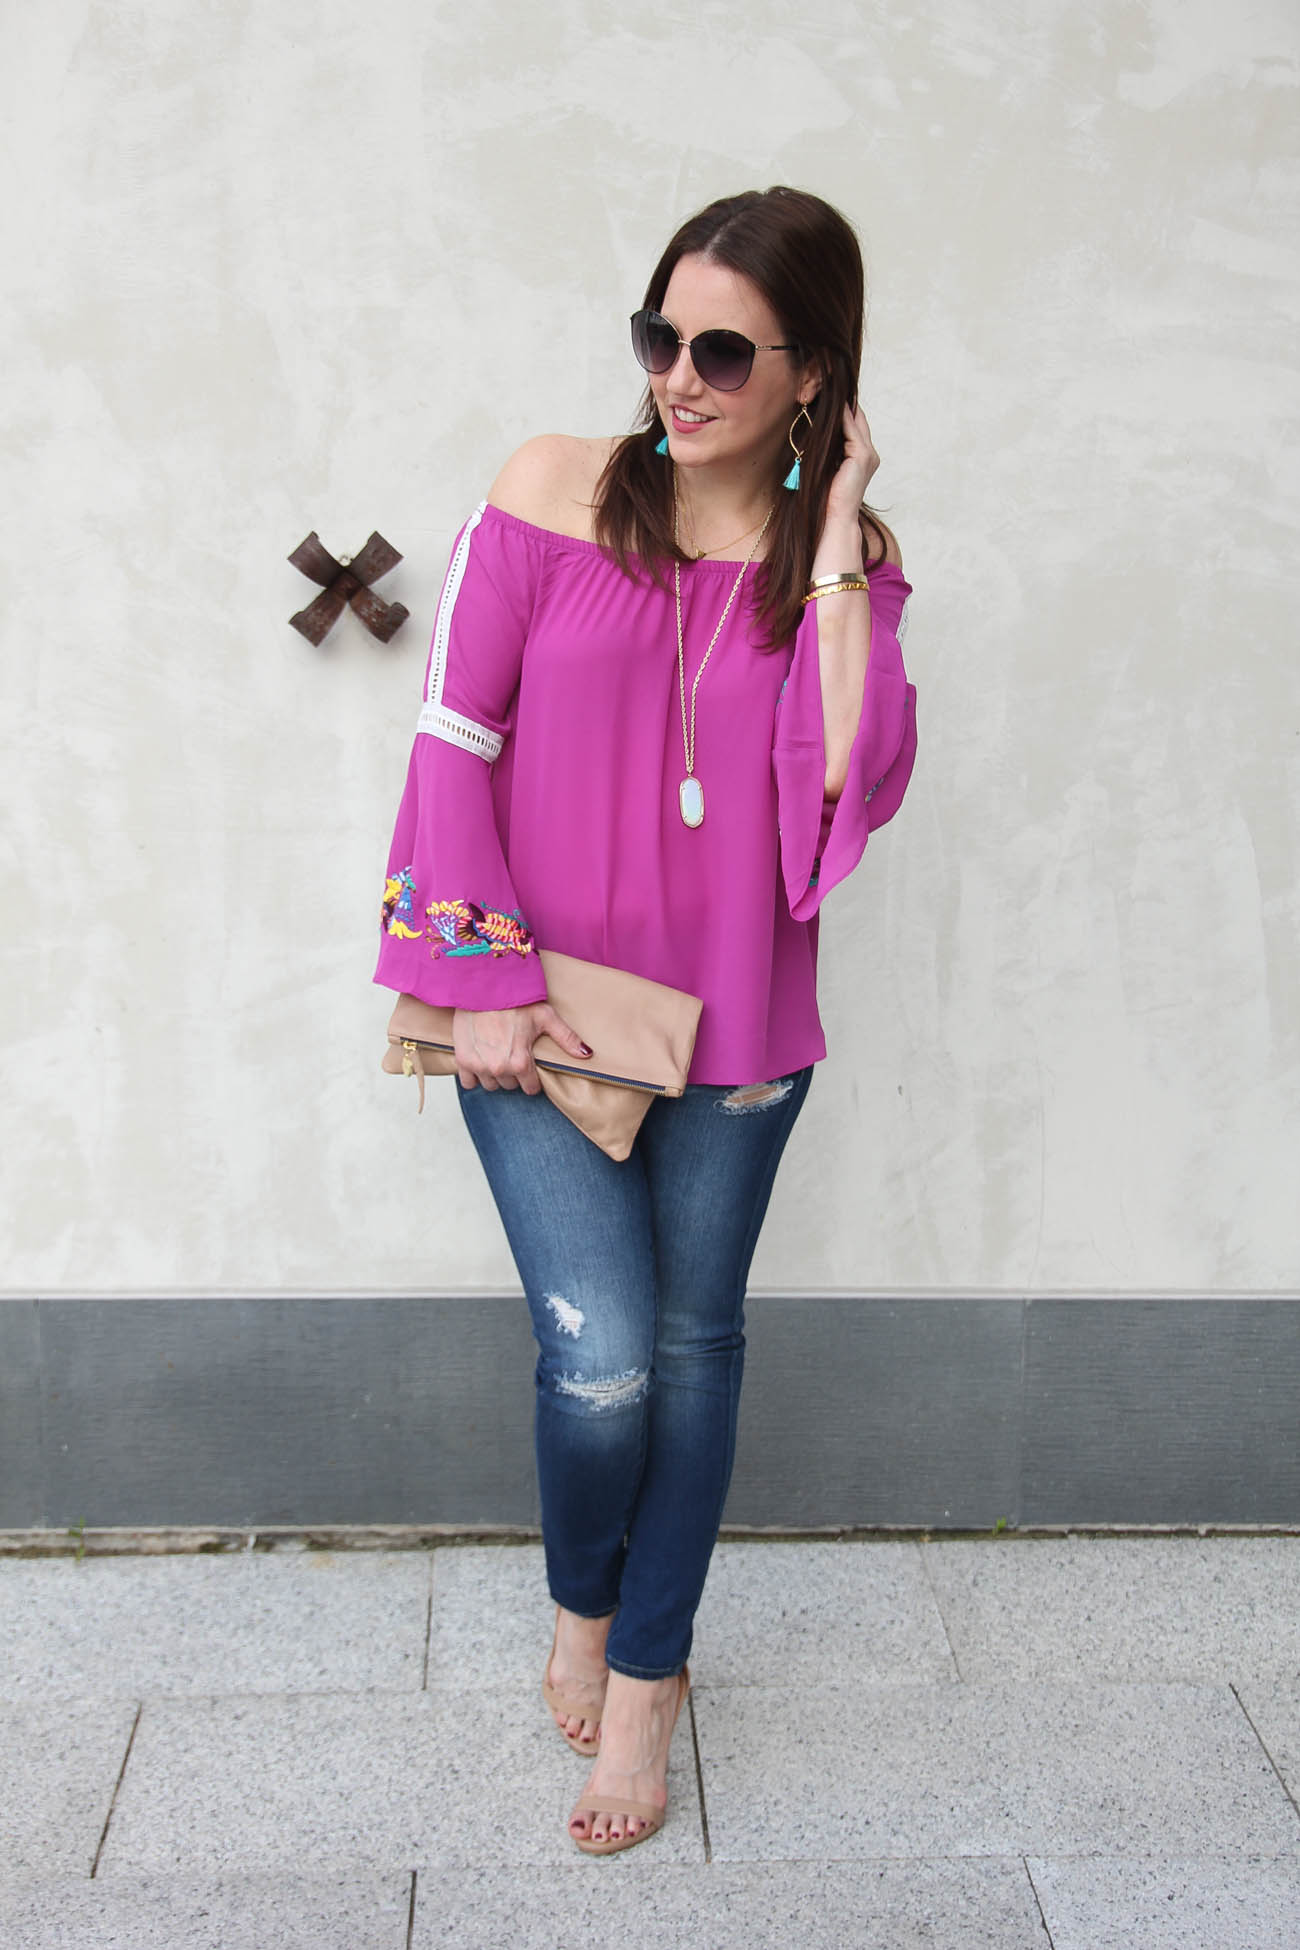 Fall Trends: Bell Sleeve Tops - Lady in VioletLady in Violet